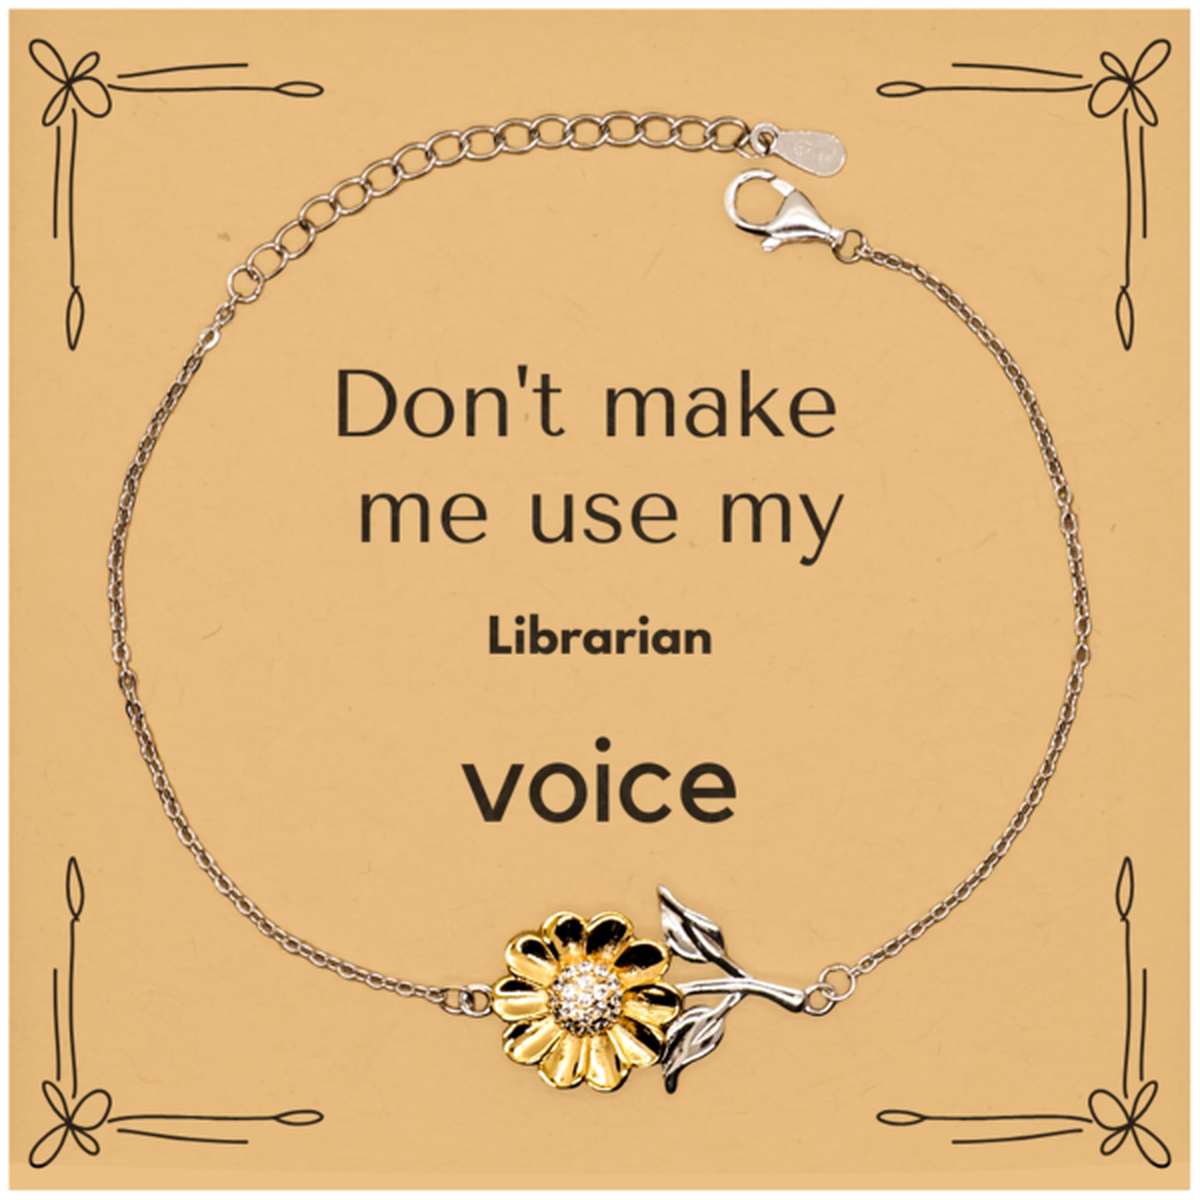 Don't make me use my Librarian voice, Sarcasm Librarian Card Gifts, Christmas Librarian Sunflower Bracelet Birthday Unique Gifts For Librarian Coworkers, Men, Women, Colleague, Friends